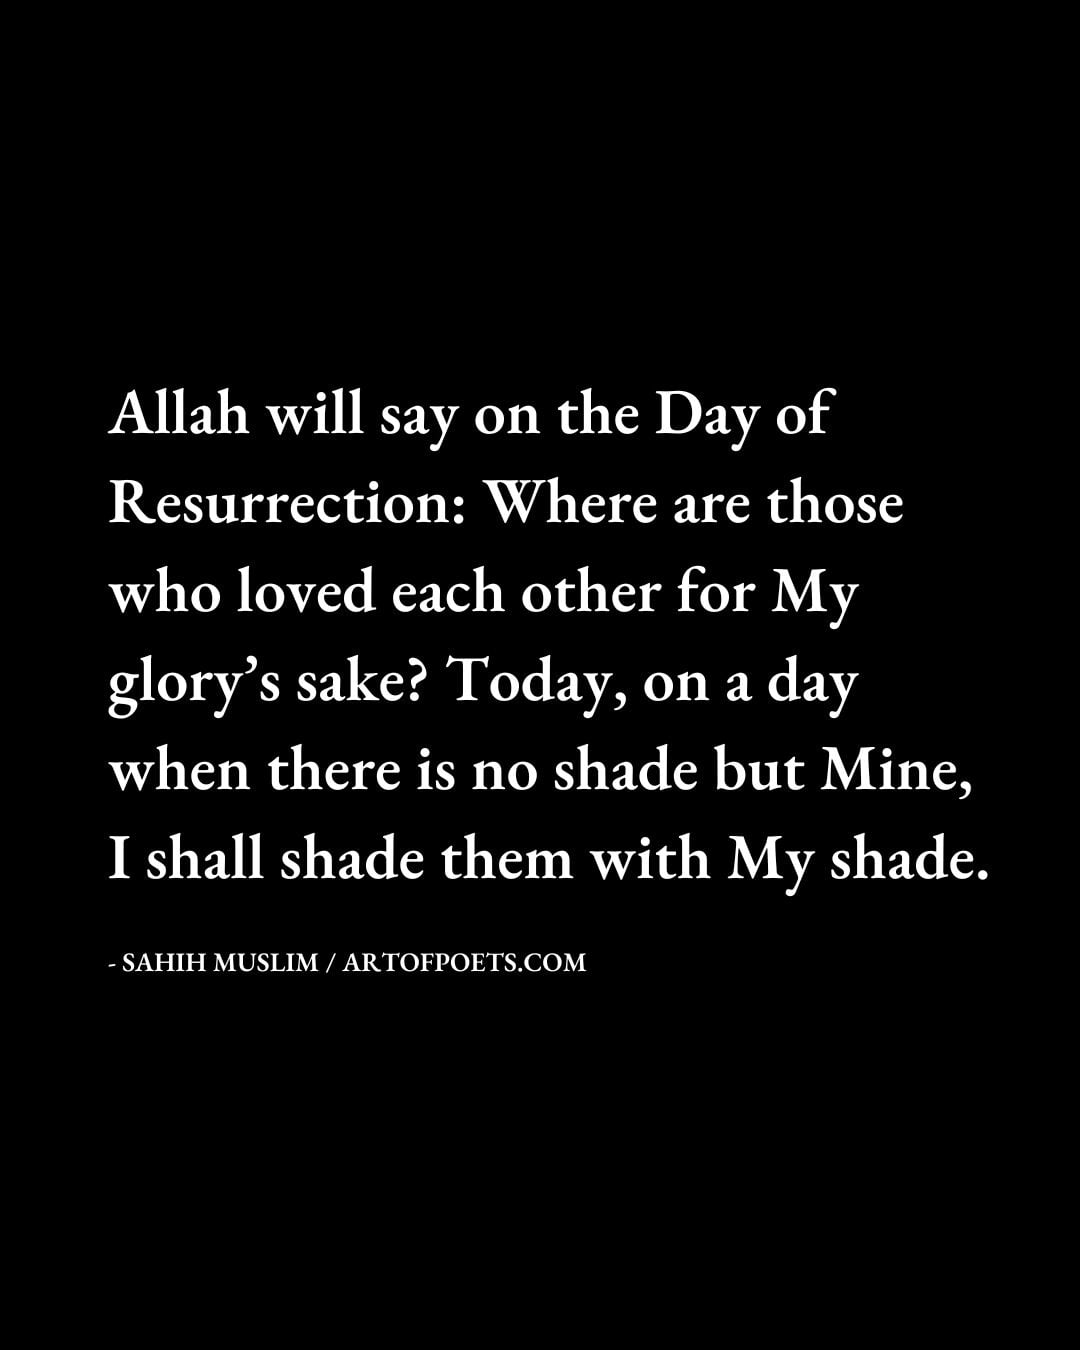 Allah will say on the Day of Resurrection Where are those who loved each other for My glorys sake Today on a day